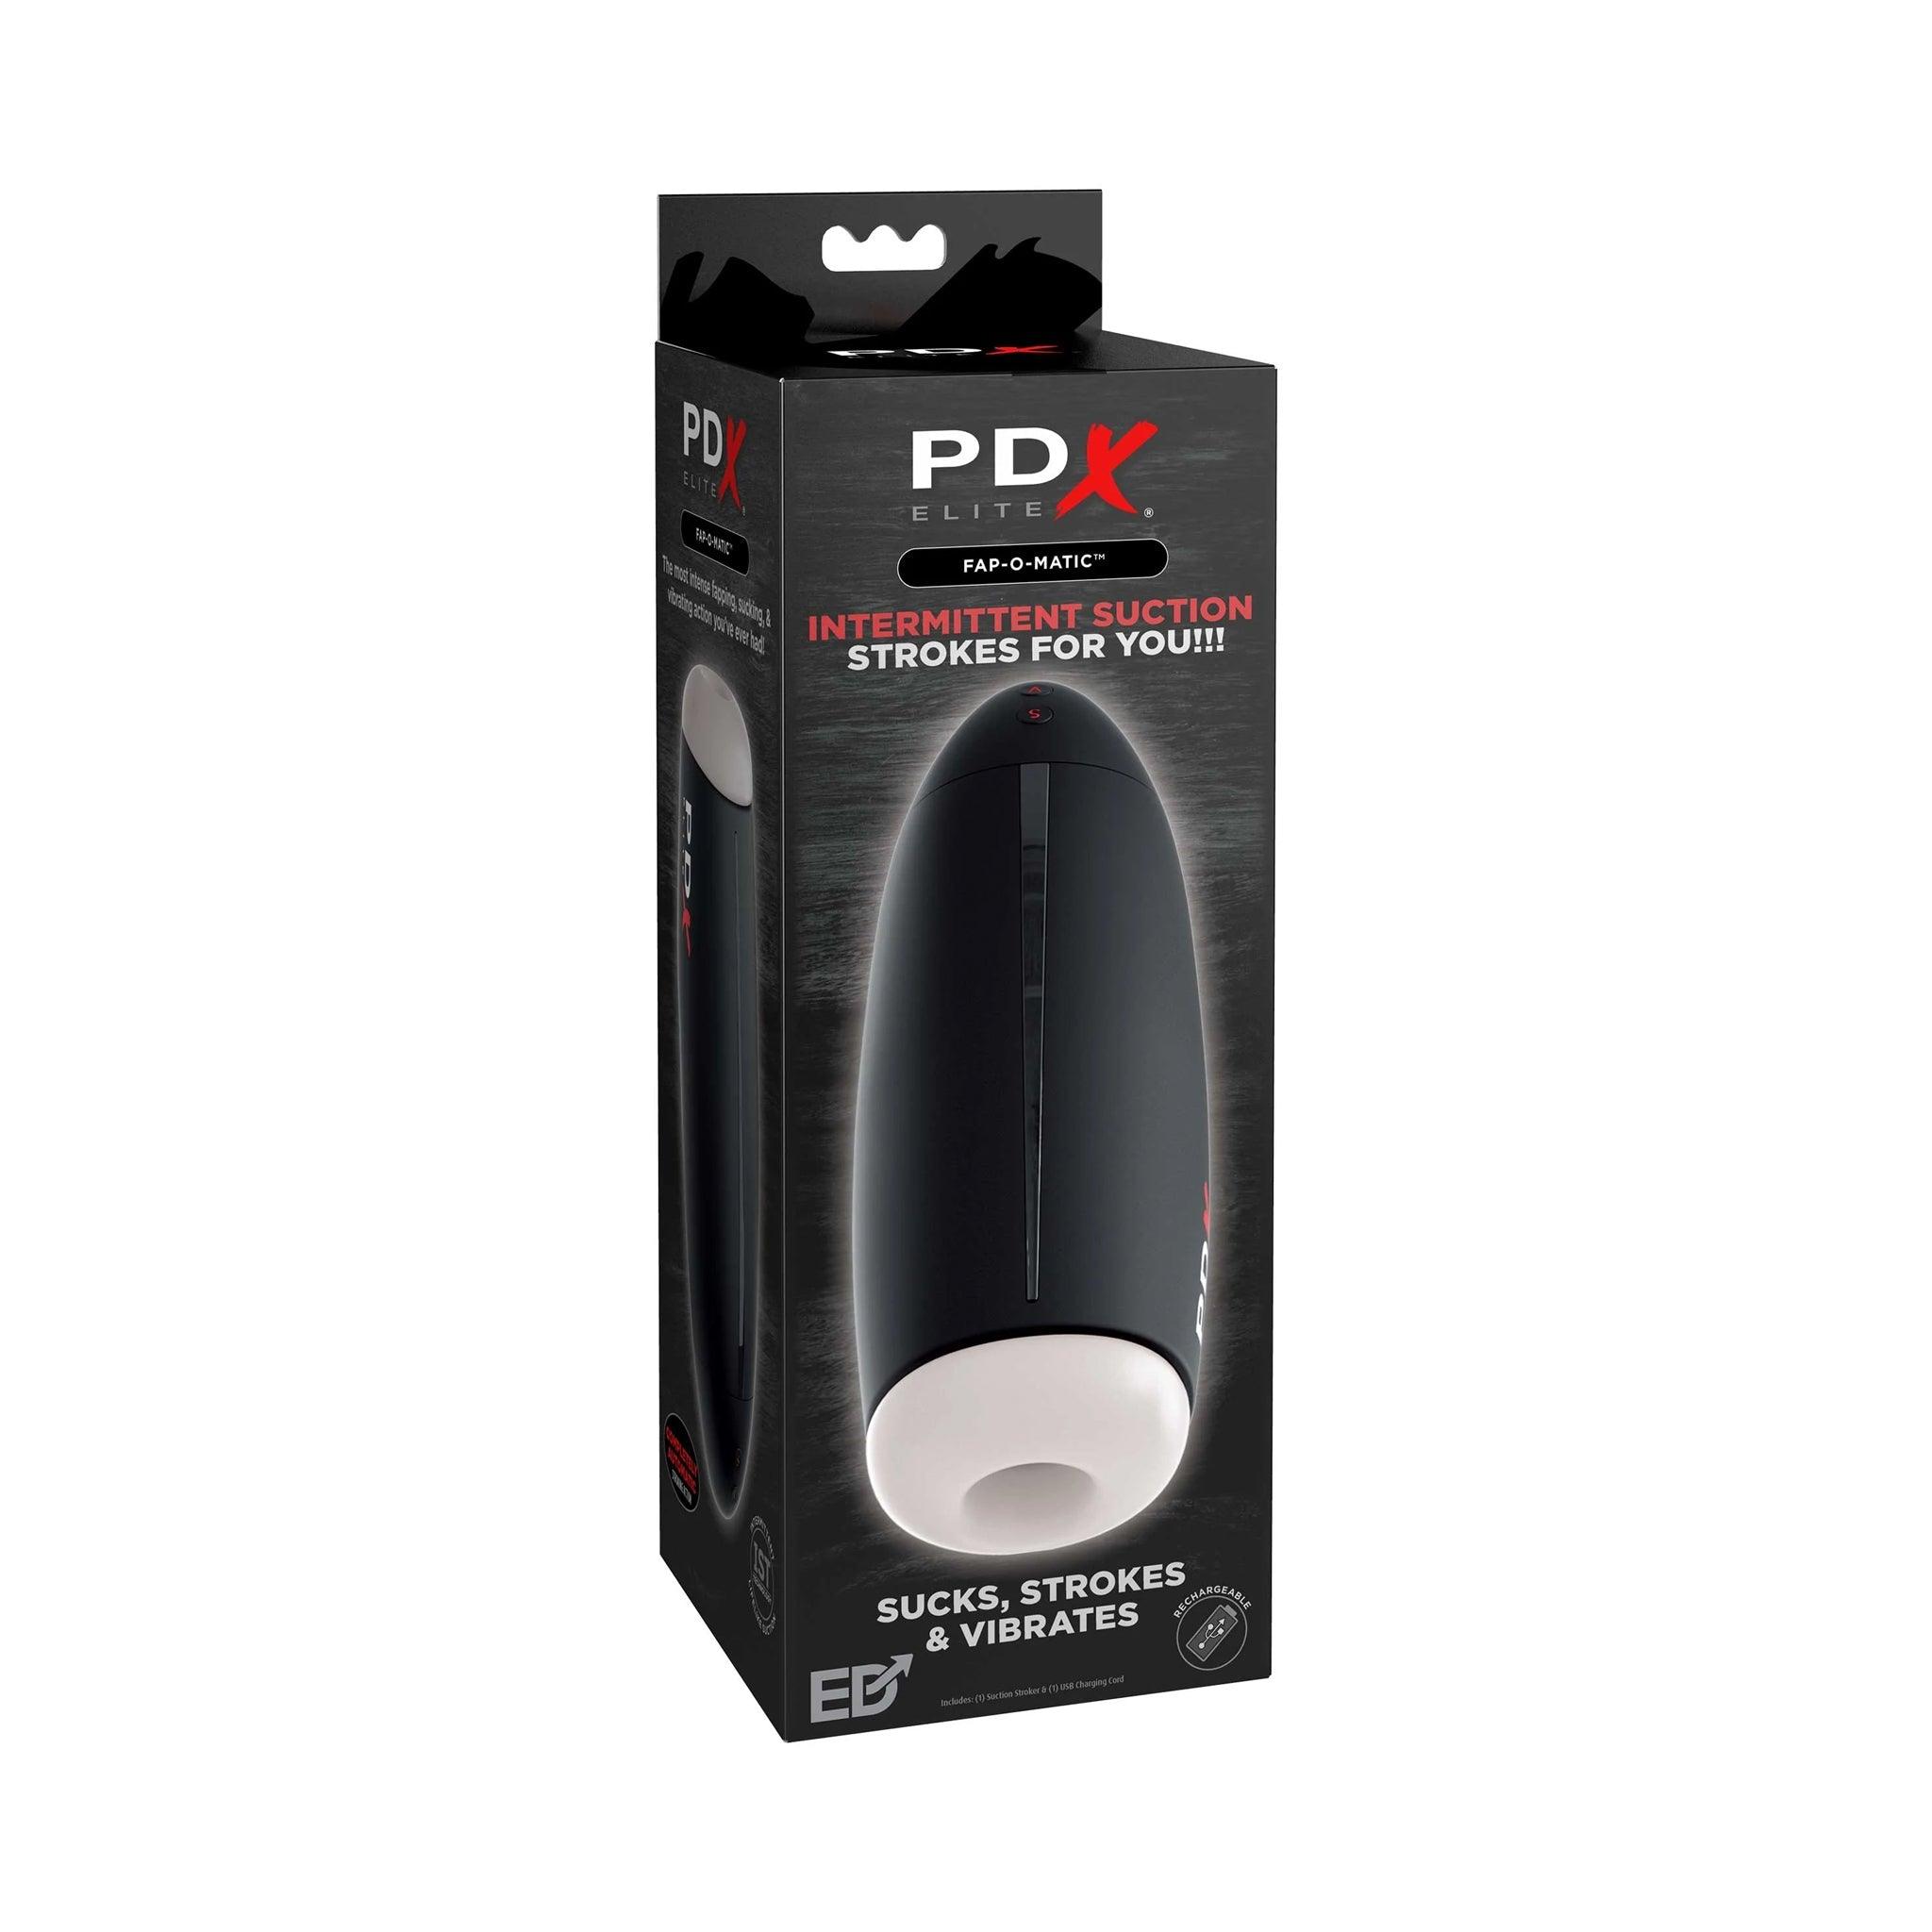 PDX Elite Fap-O-Matic Intermittent Suction Strokes For You - Rechargeable - CheapLubes.com